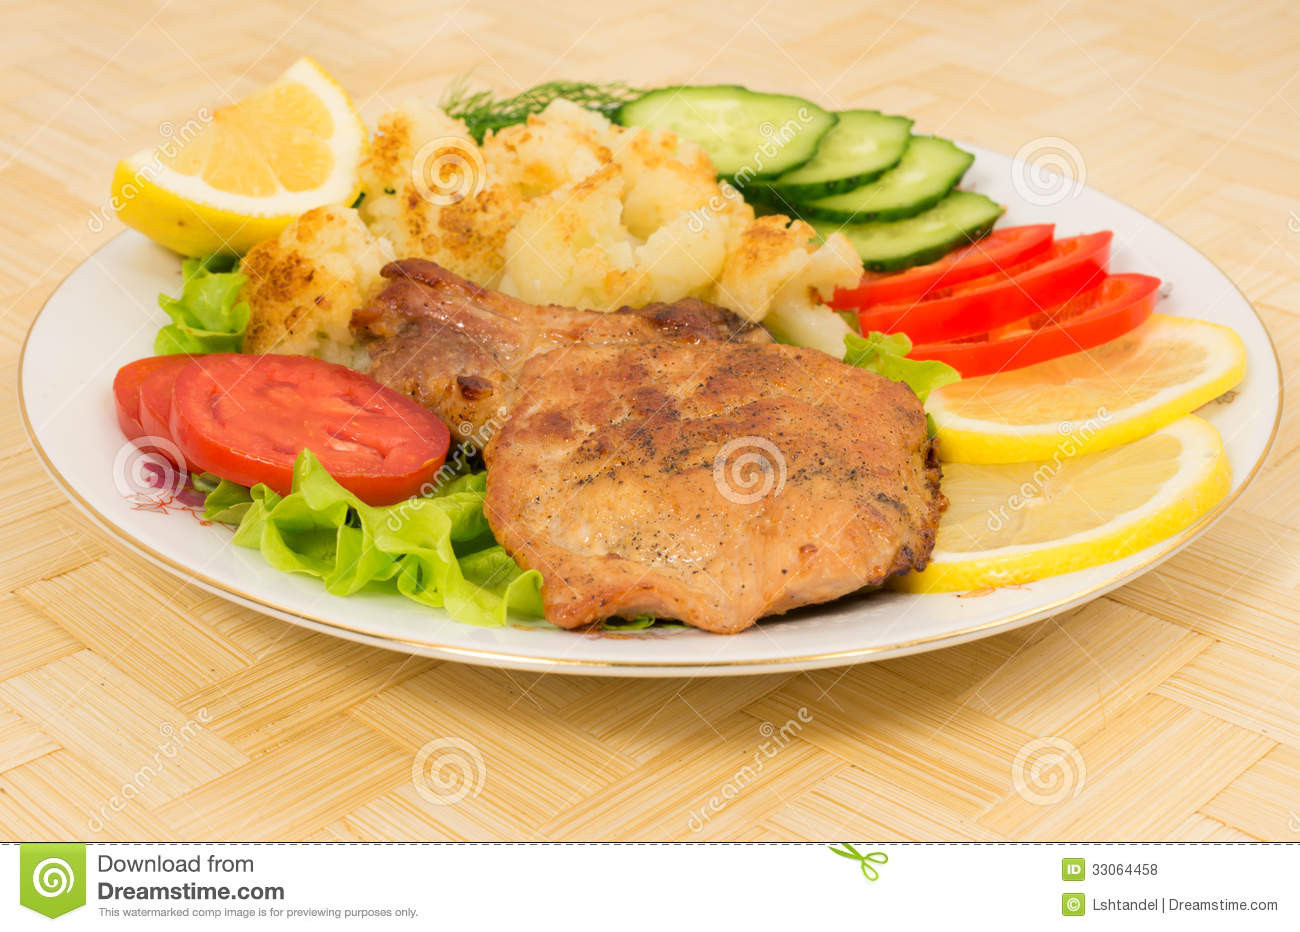 Side Dishes For Grilled Pork Chops
 Grilled Pork Chop With A Side Dish Cauliflower And